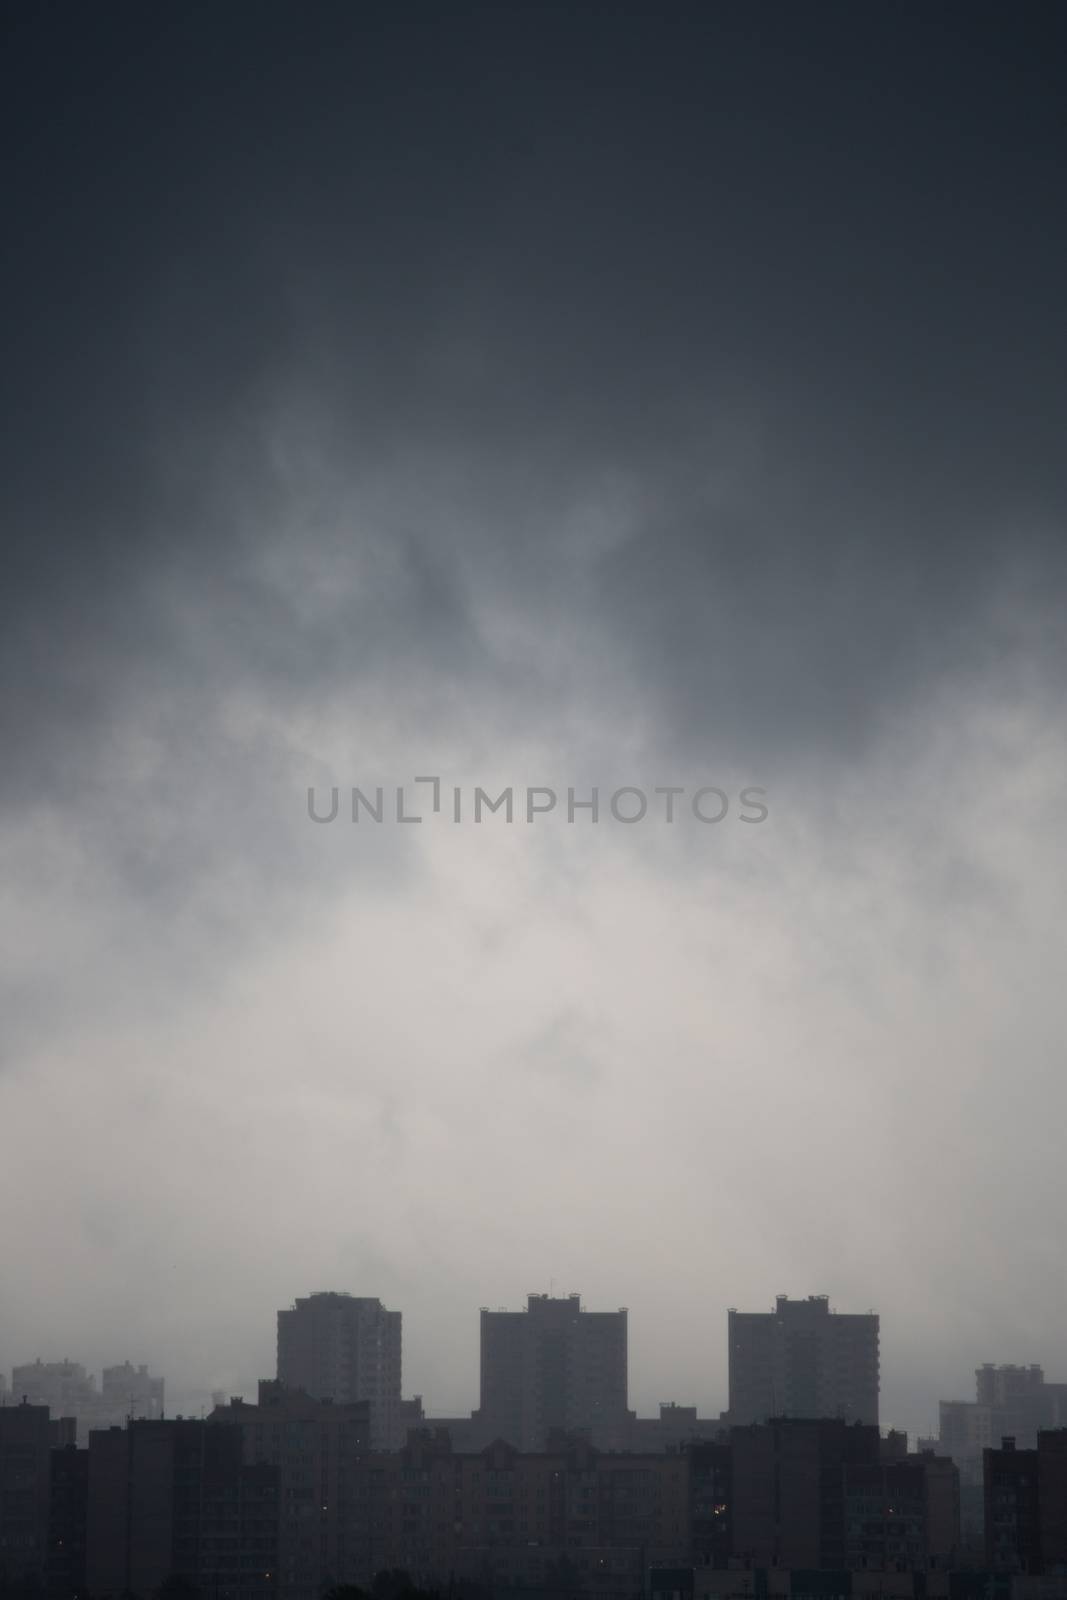 Gloomy dark city view on typical generic houses and dark cloudy sky